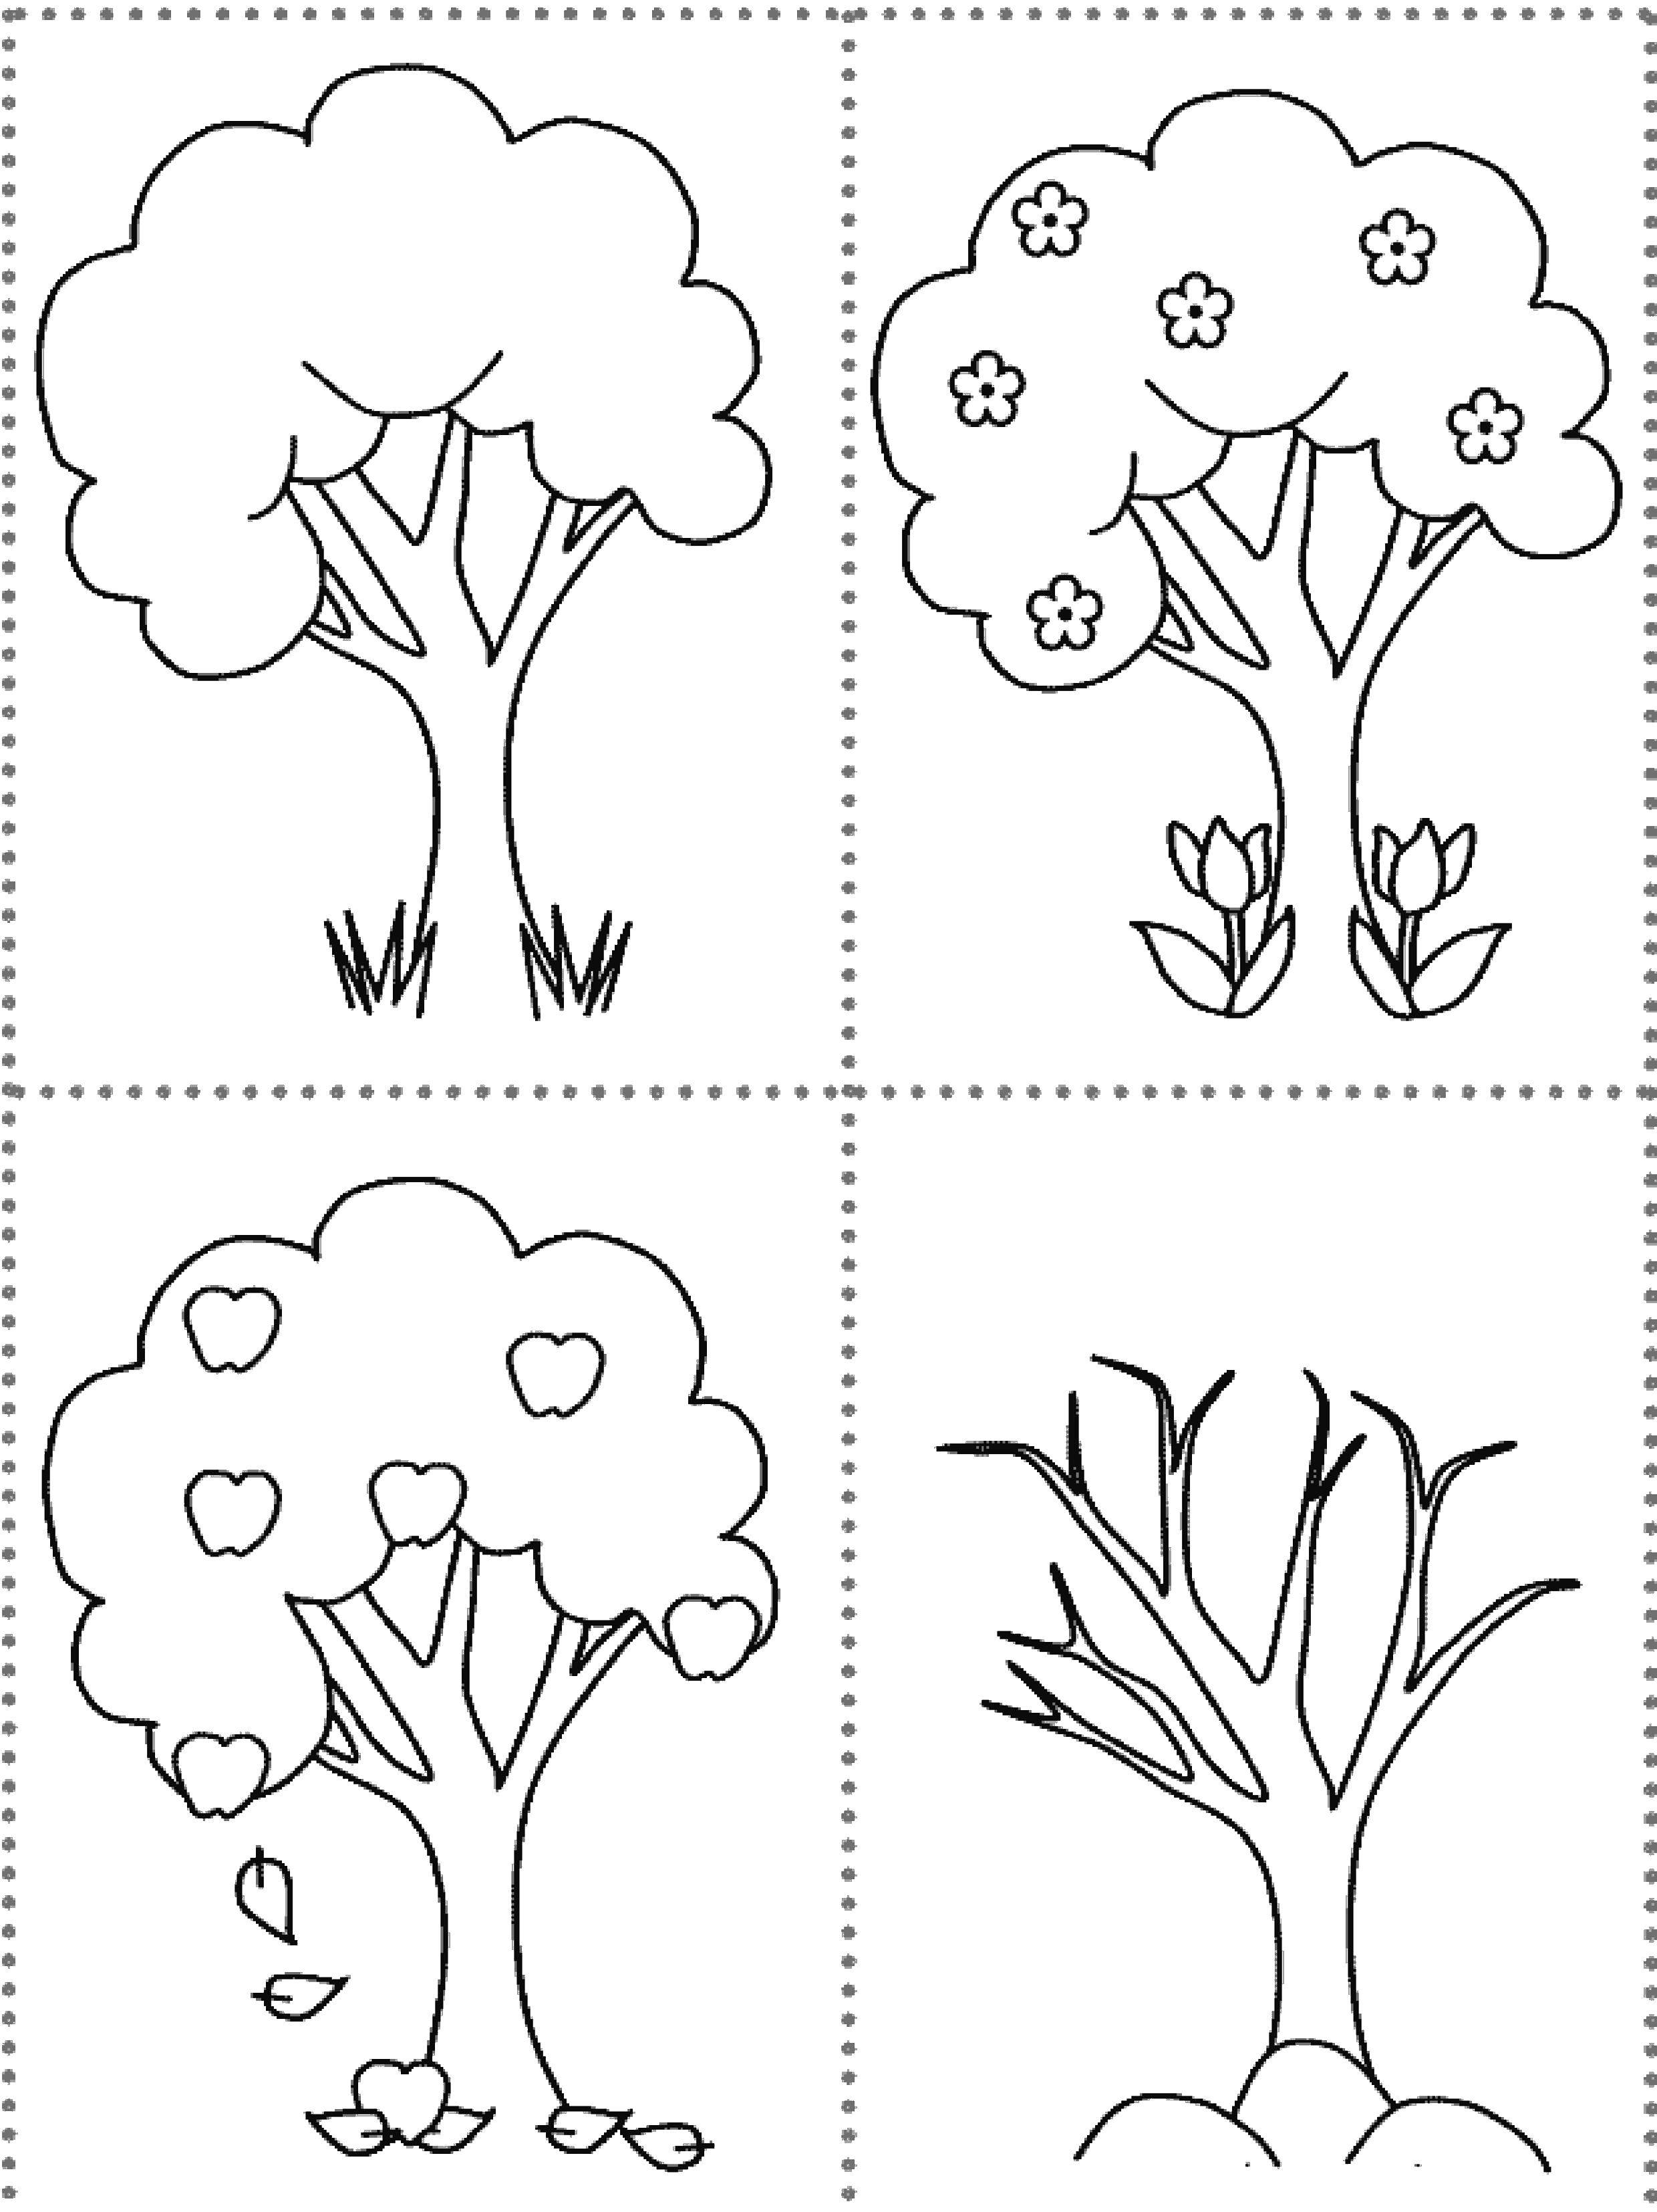 Coloring Trees. Category coloring. Tags:  seasons, trees.